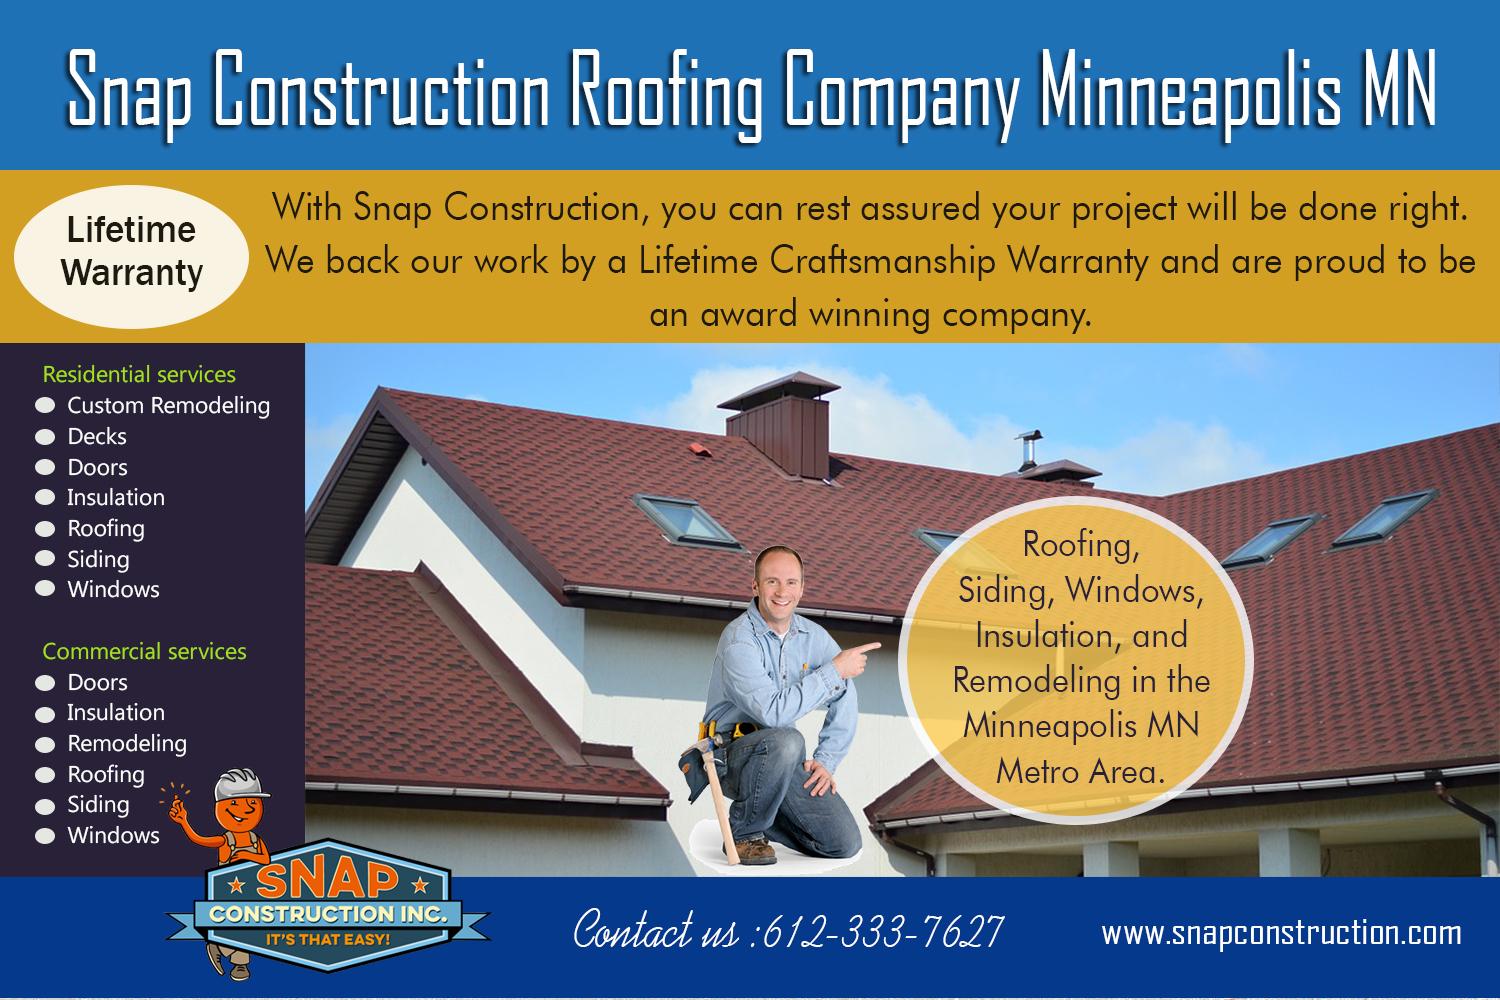 Snap Construction Roofing company minneapolis